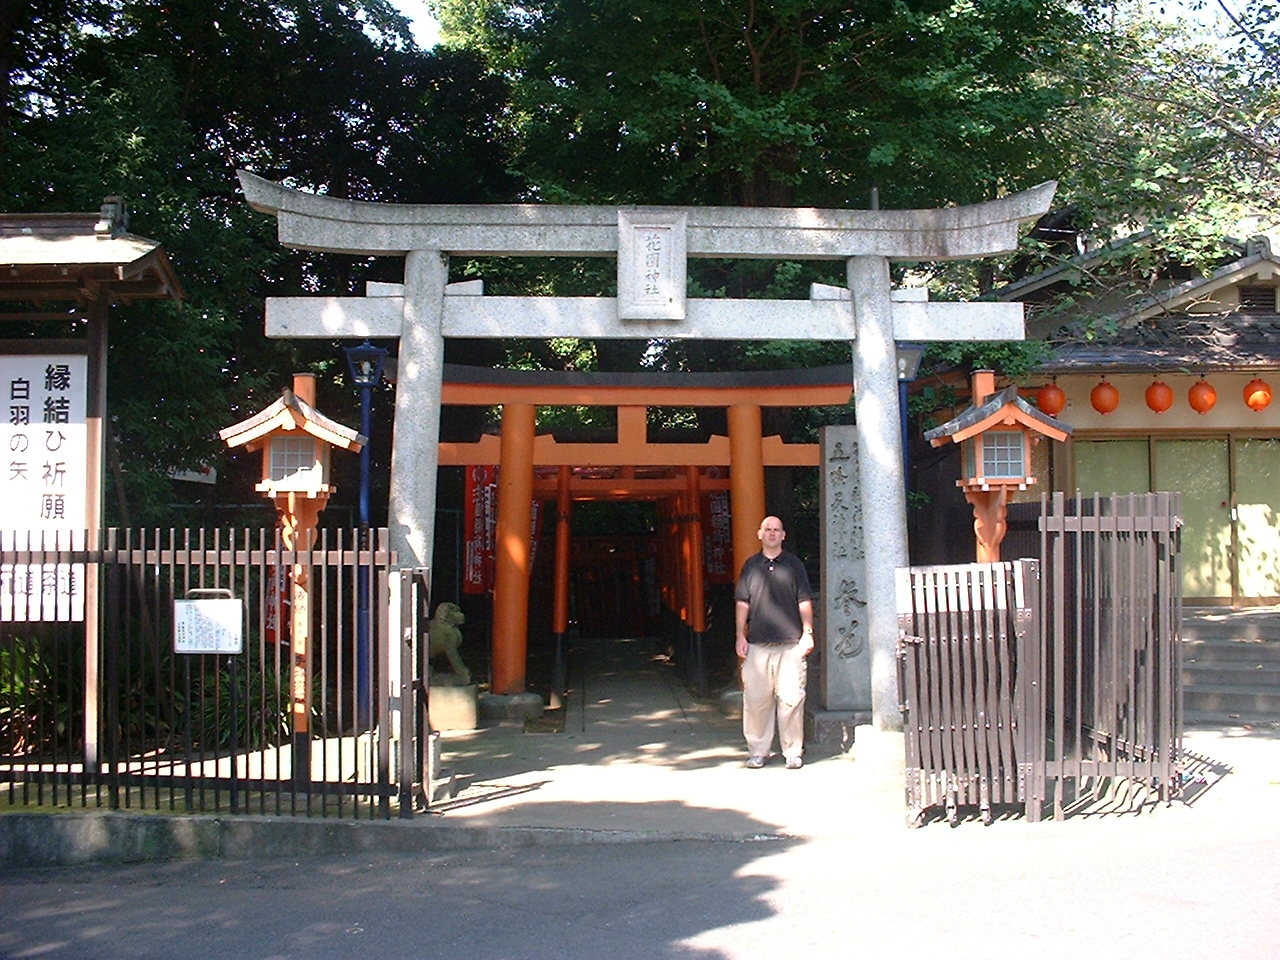 a white man stands near a stone torii gate that leads to some wooden vermillion ones on shrine grounds